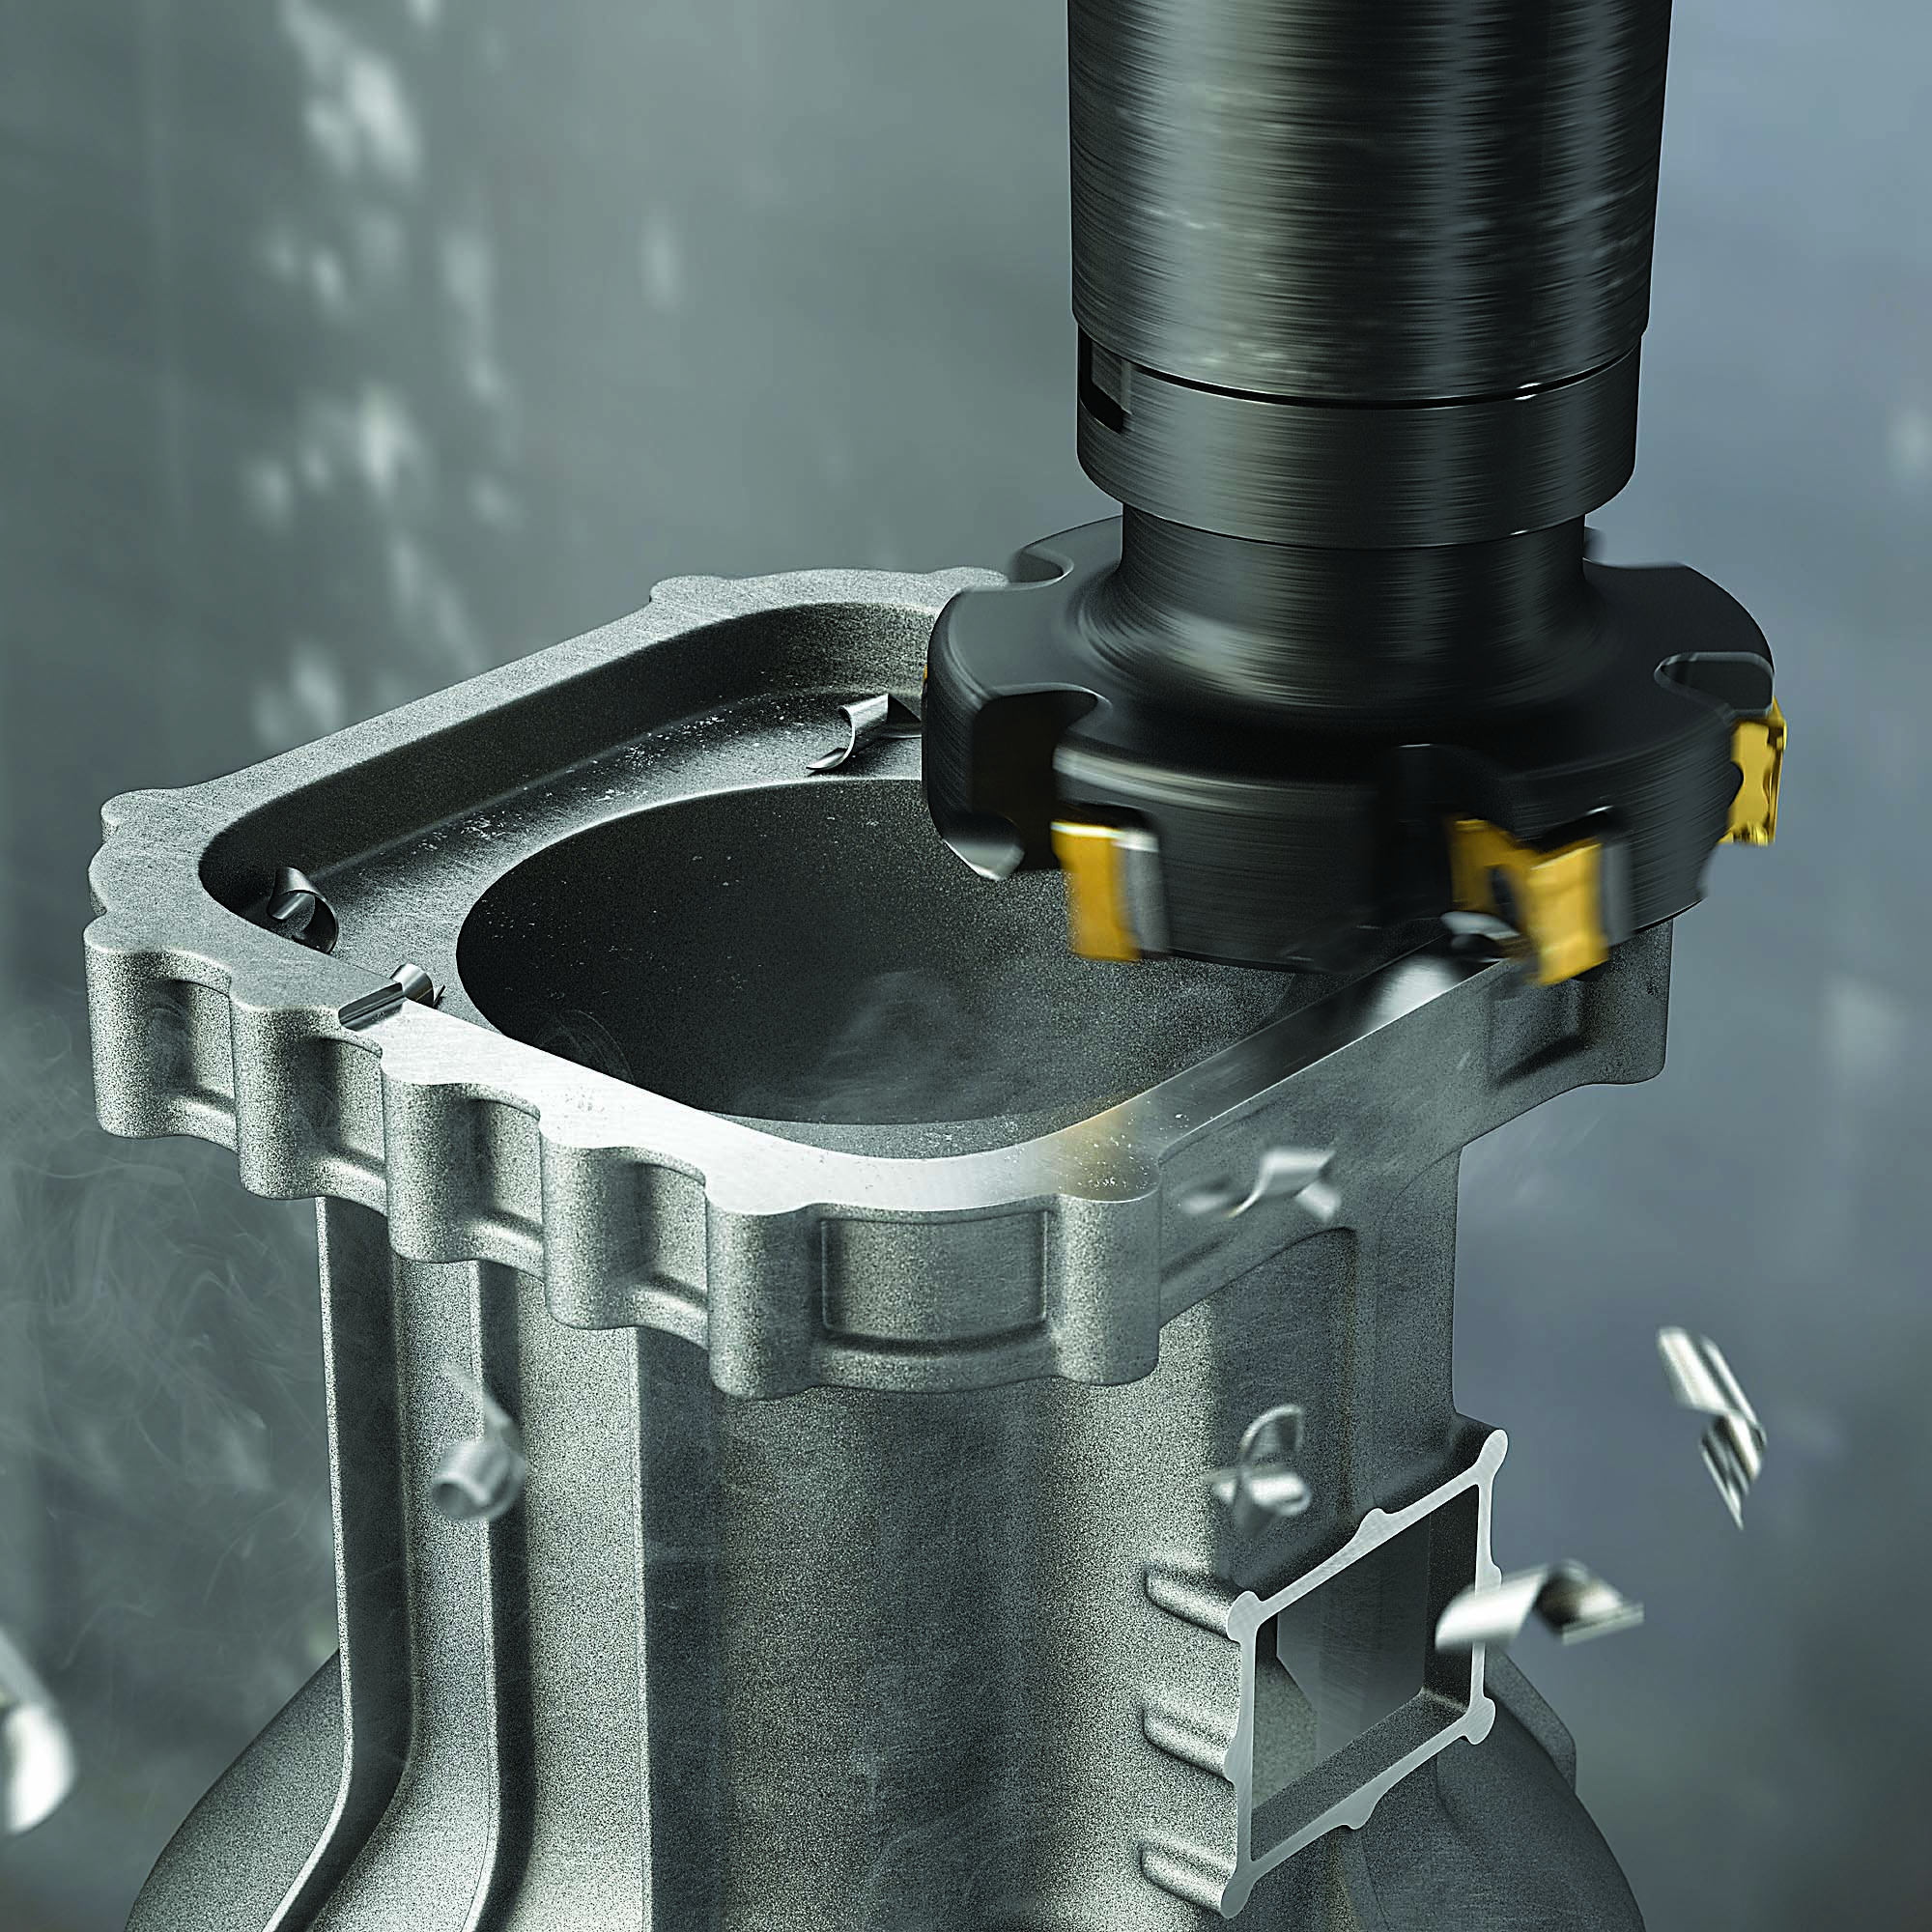 Shoulder milling is a basic yet versatile milling application recommended for producing a variety of components.